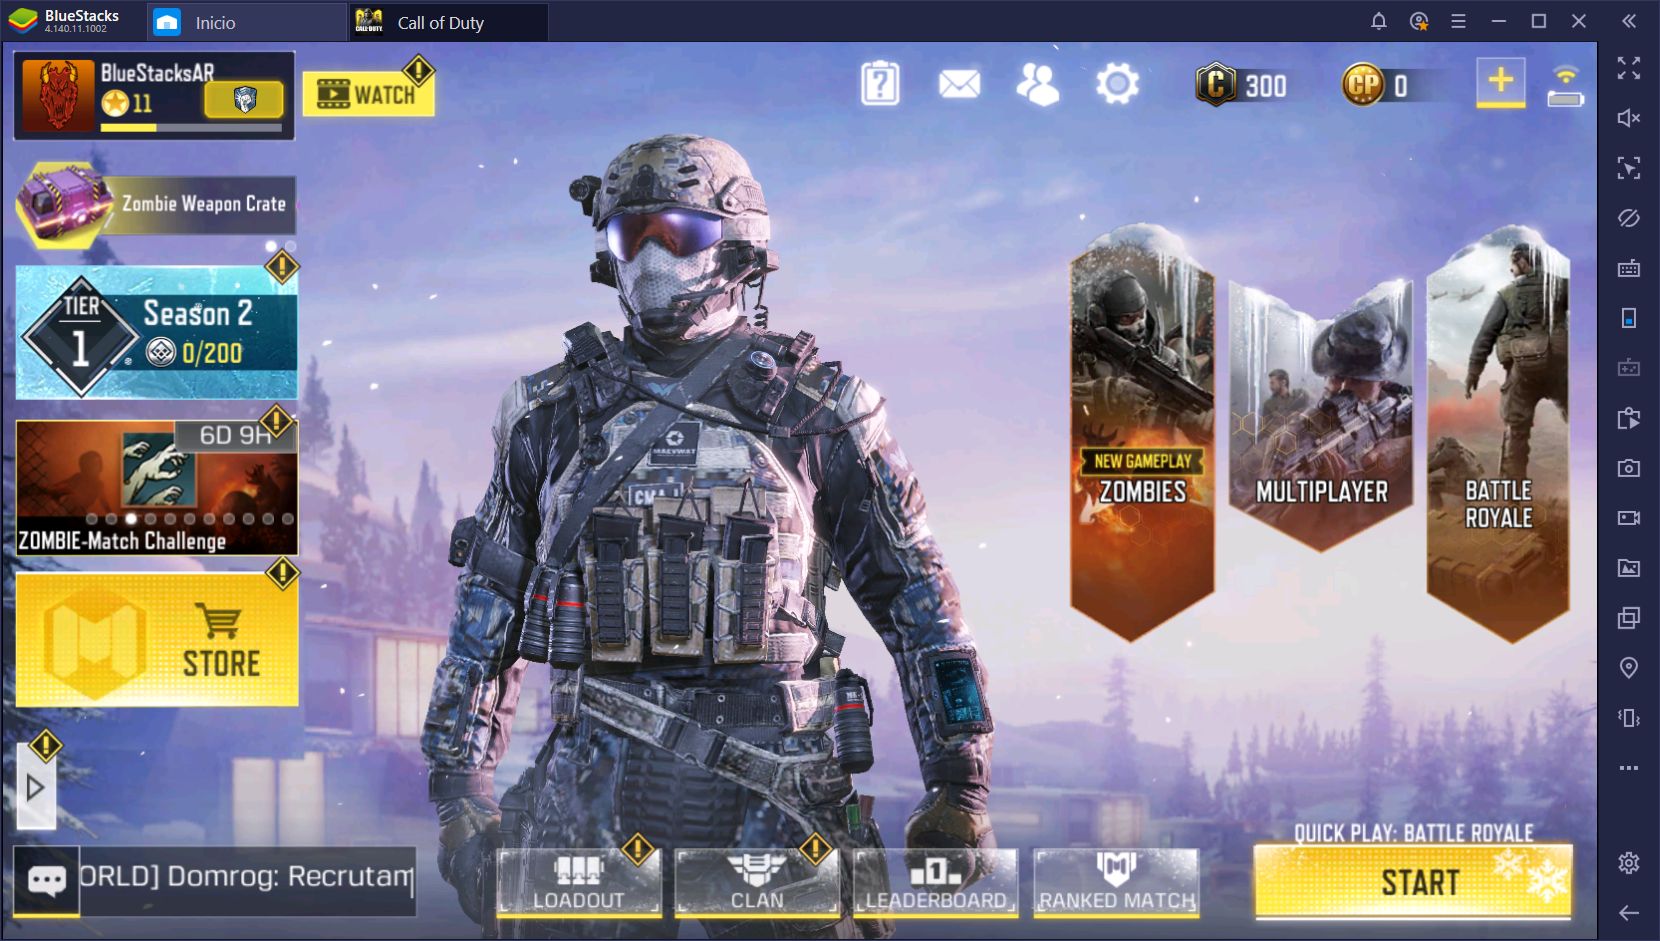 Call of Duty: Mobile on PC Patch 2.0 - Here’s What’s New